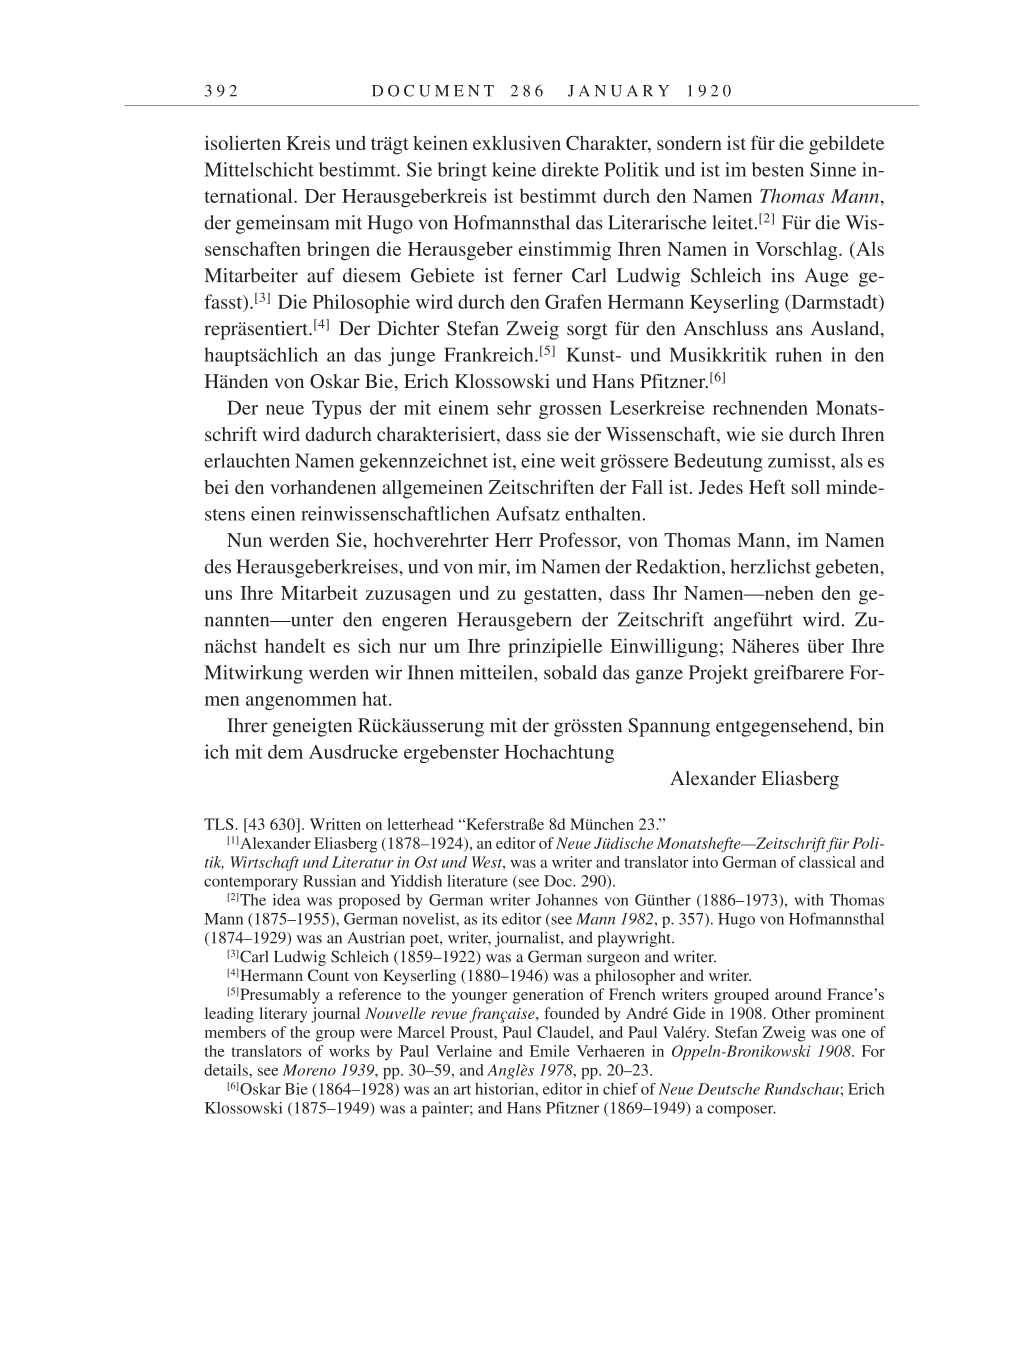 Volume 9: The Berlin Years: Correspondence January 1919-April 1920 page 392